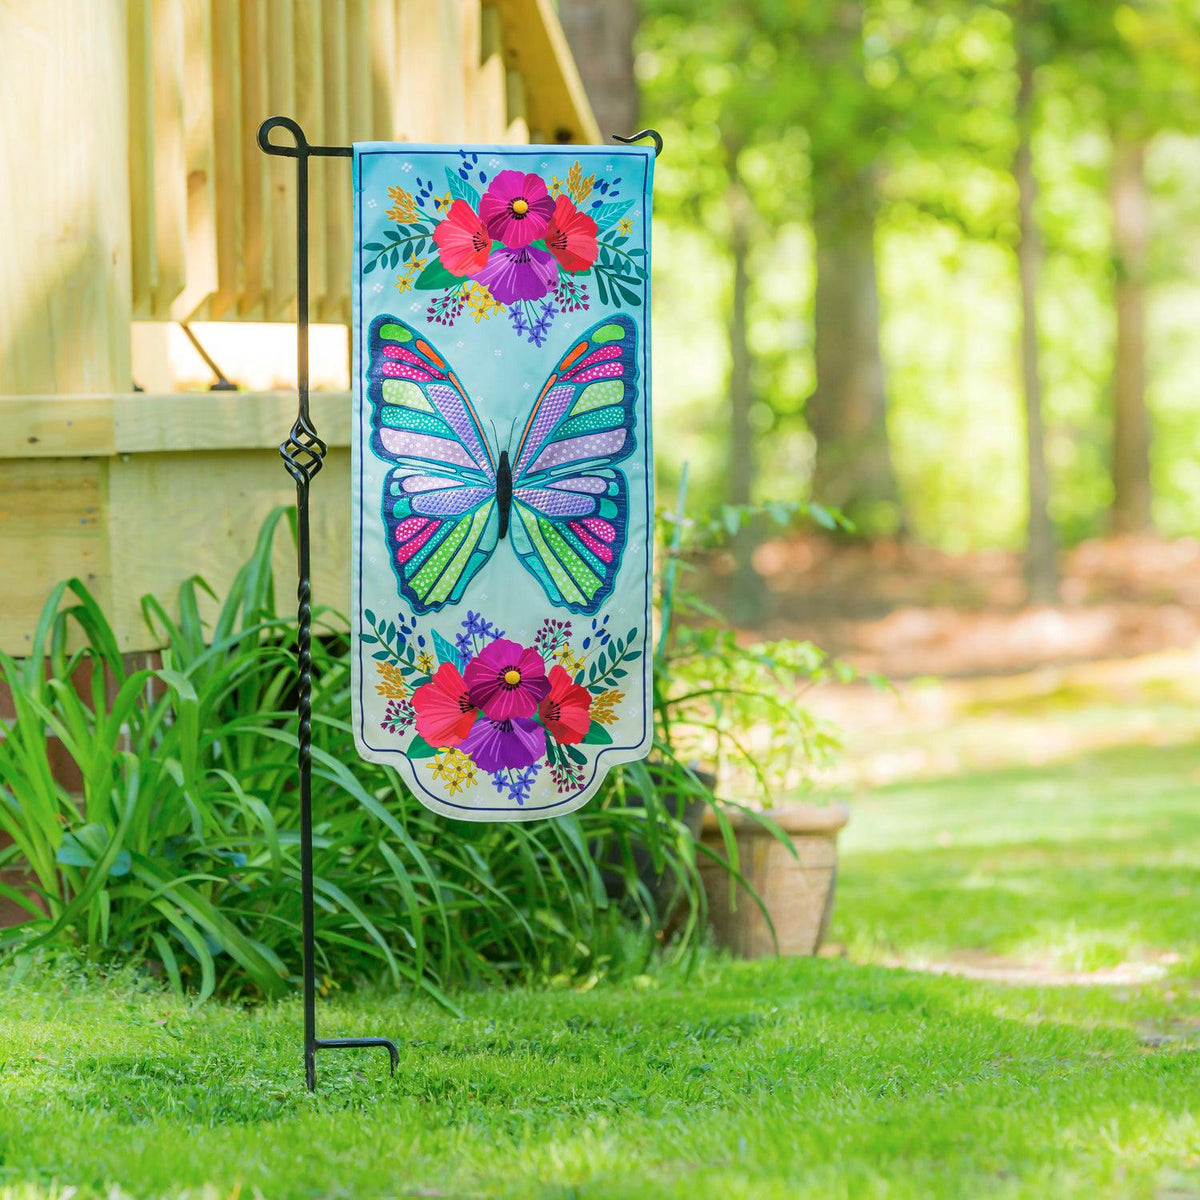 Enjoy the beauty of the Butterfly Floral Textile Décor from the Everlasting Impressions collection. This extra-long garden flag features a stunning multi-colored butterfly with bouquets of flowers at the top and the bottom of the flag.